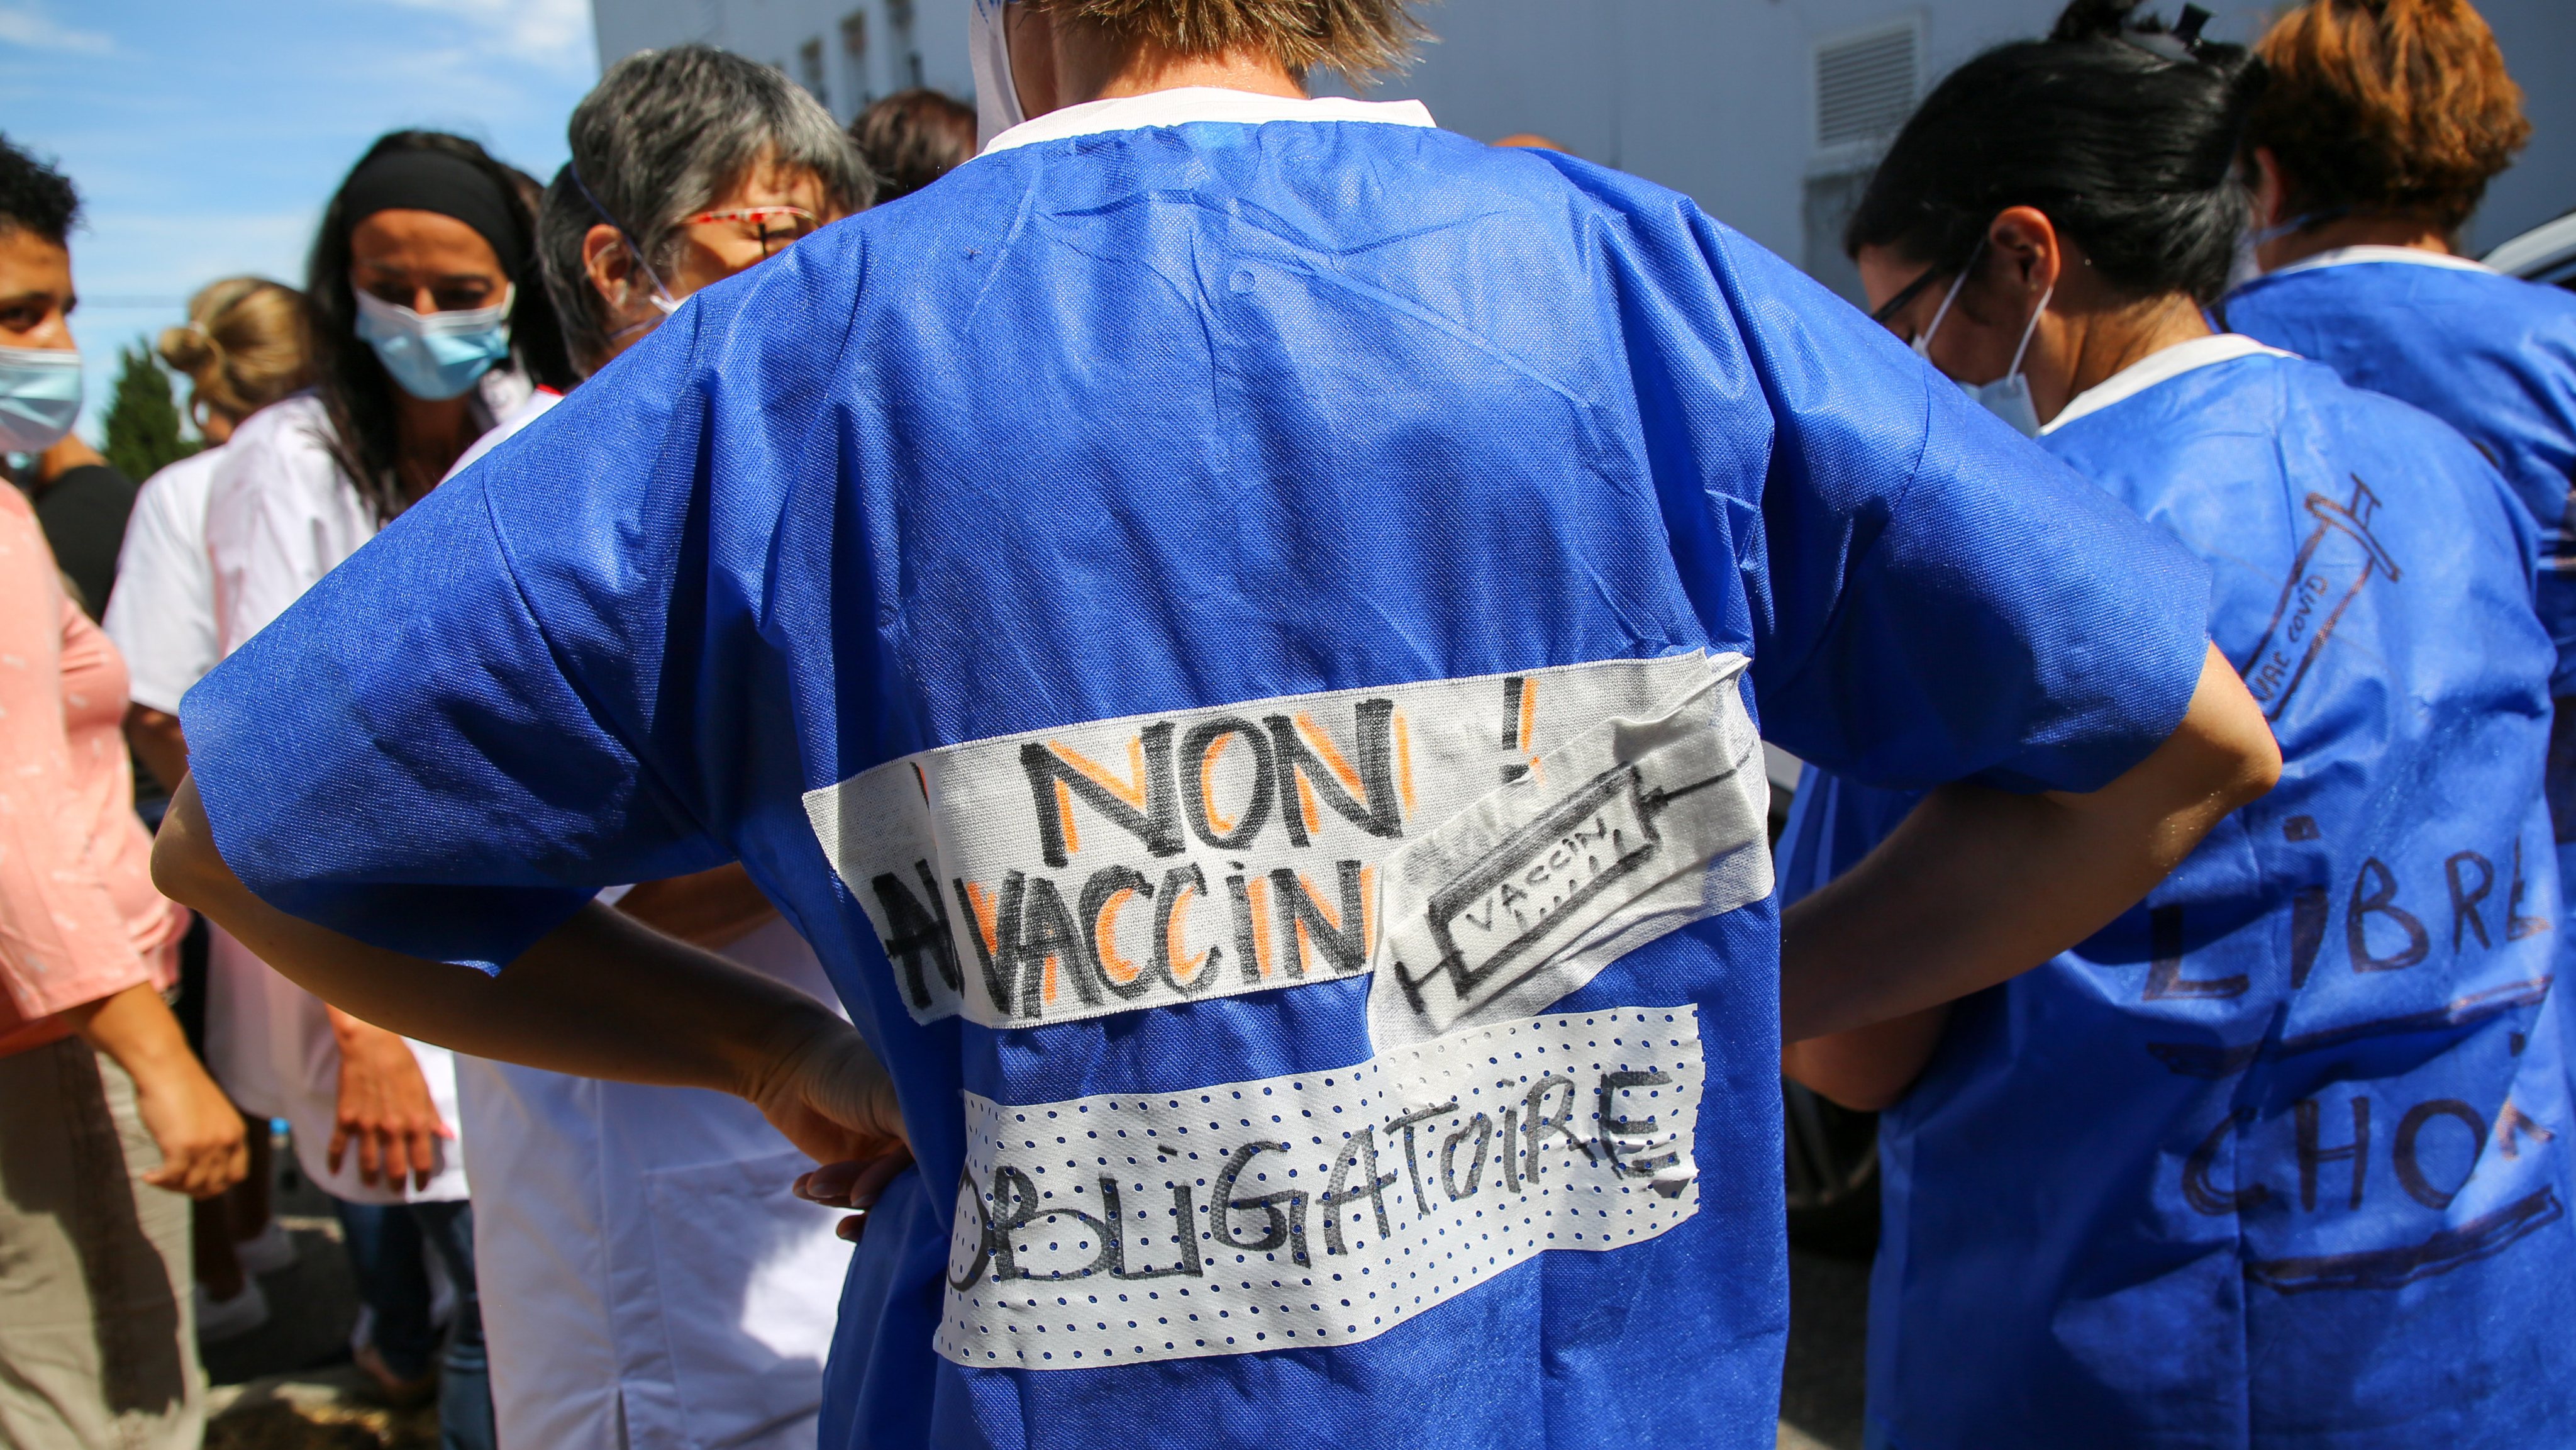 A protester seen with slogans written on back of her garment